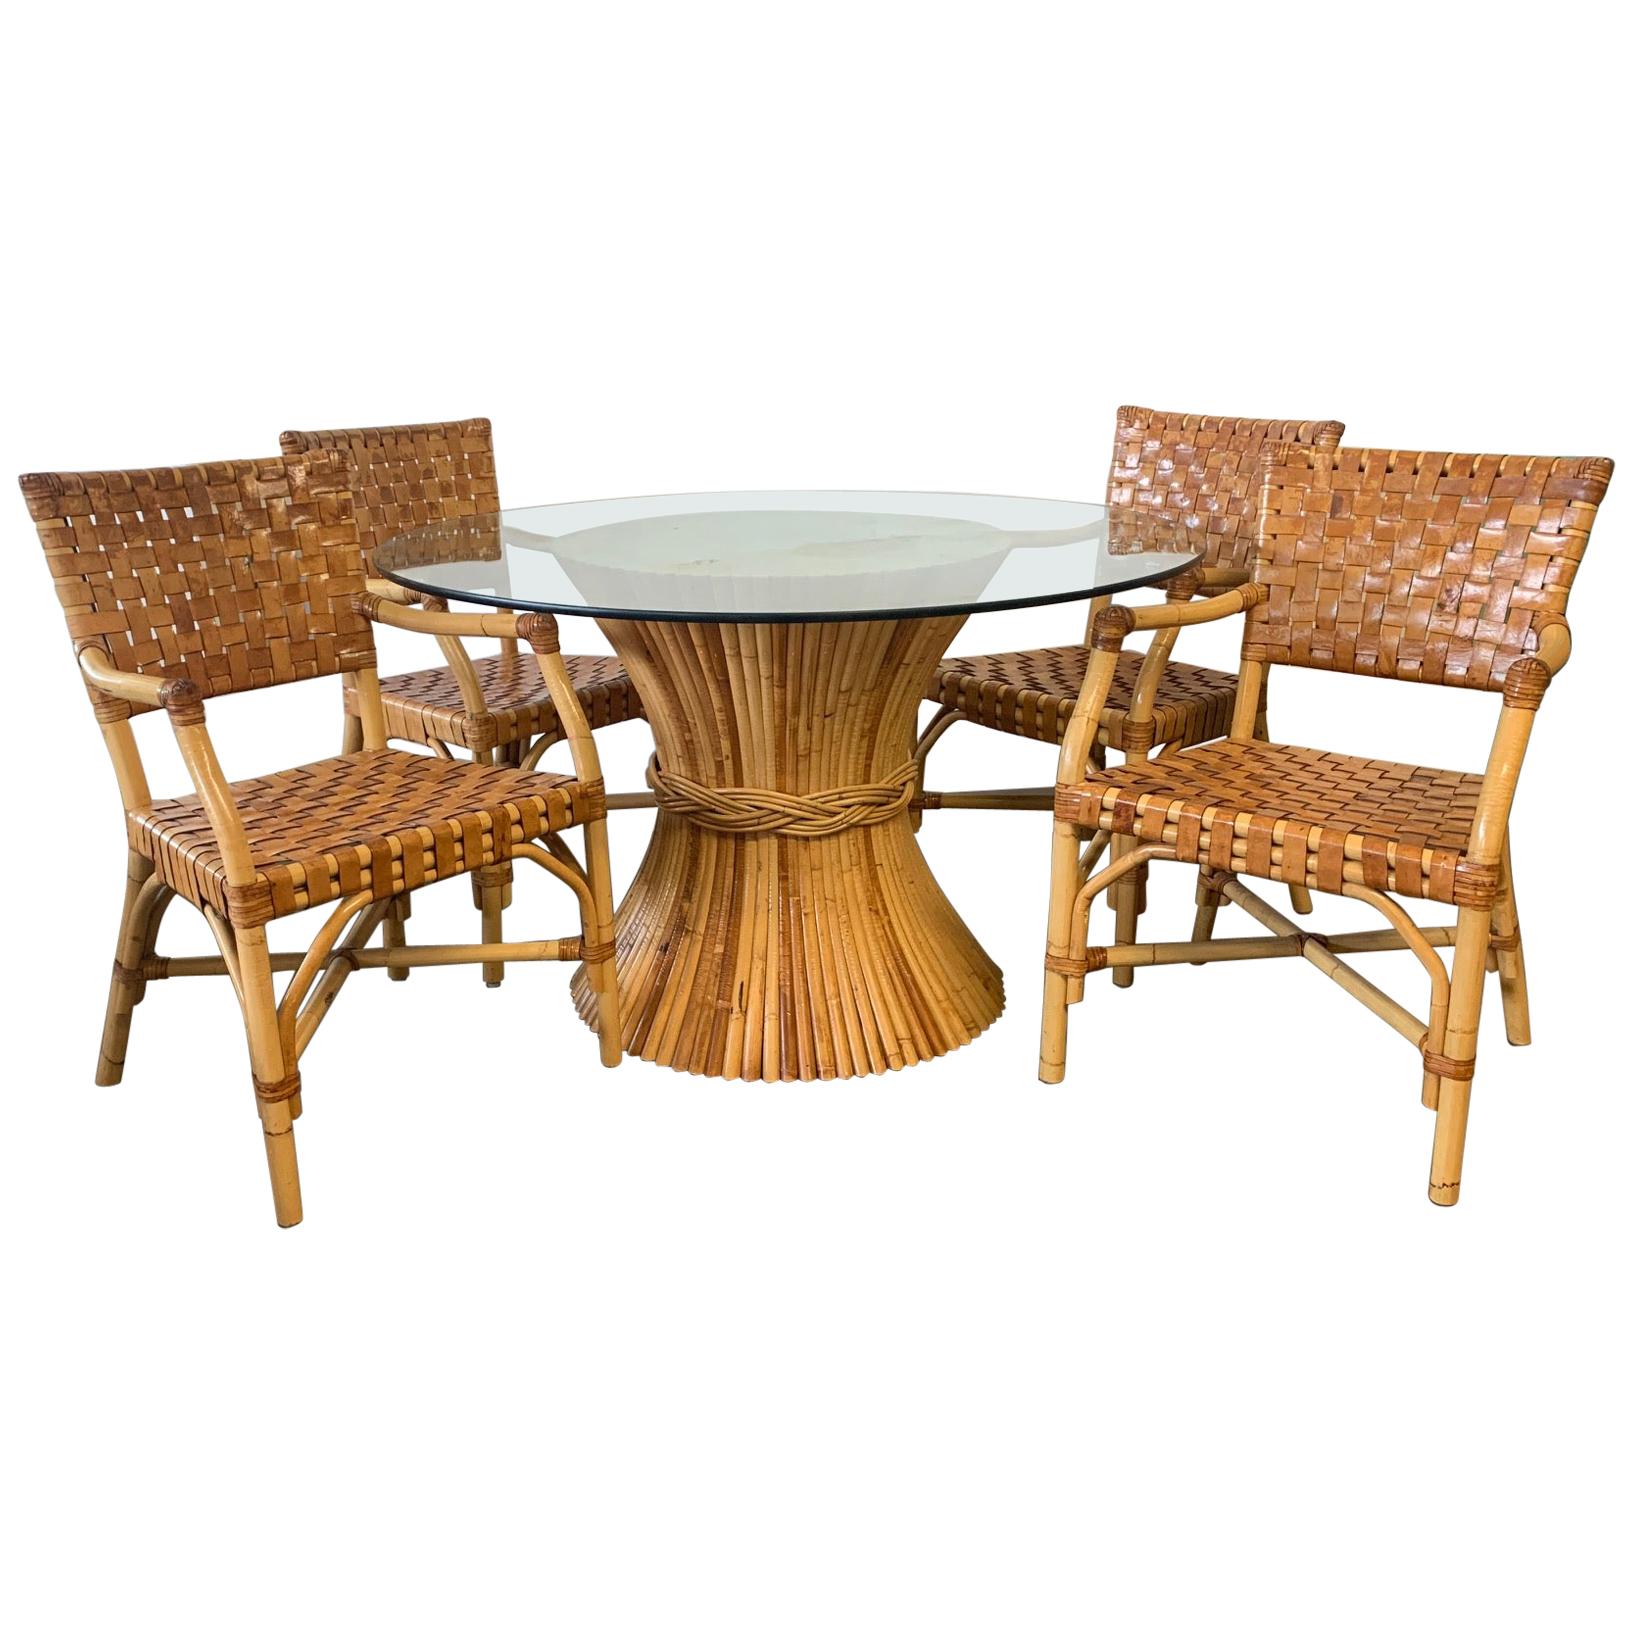 Rattan and Leather Dining Set, 4 Chairs and Sheaf of Wheat Table